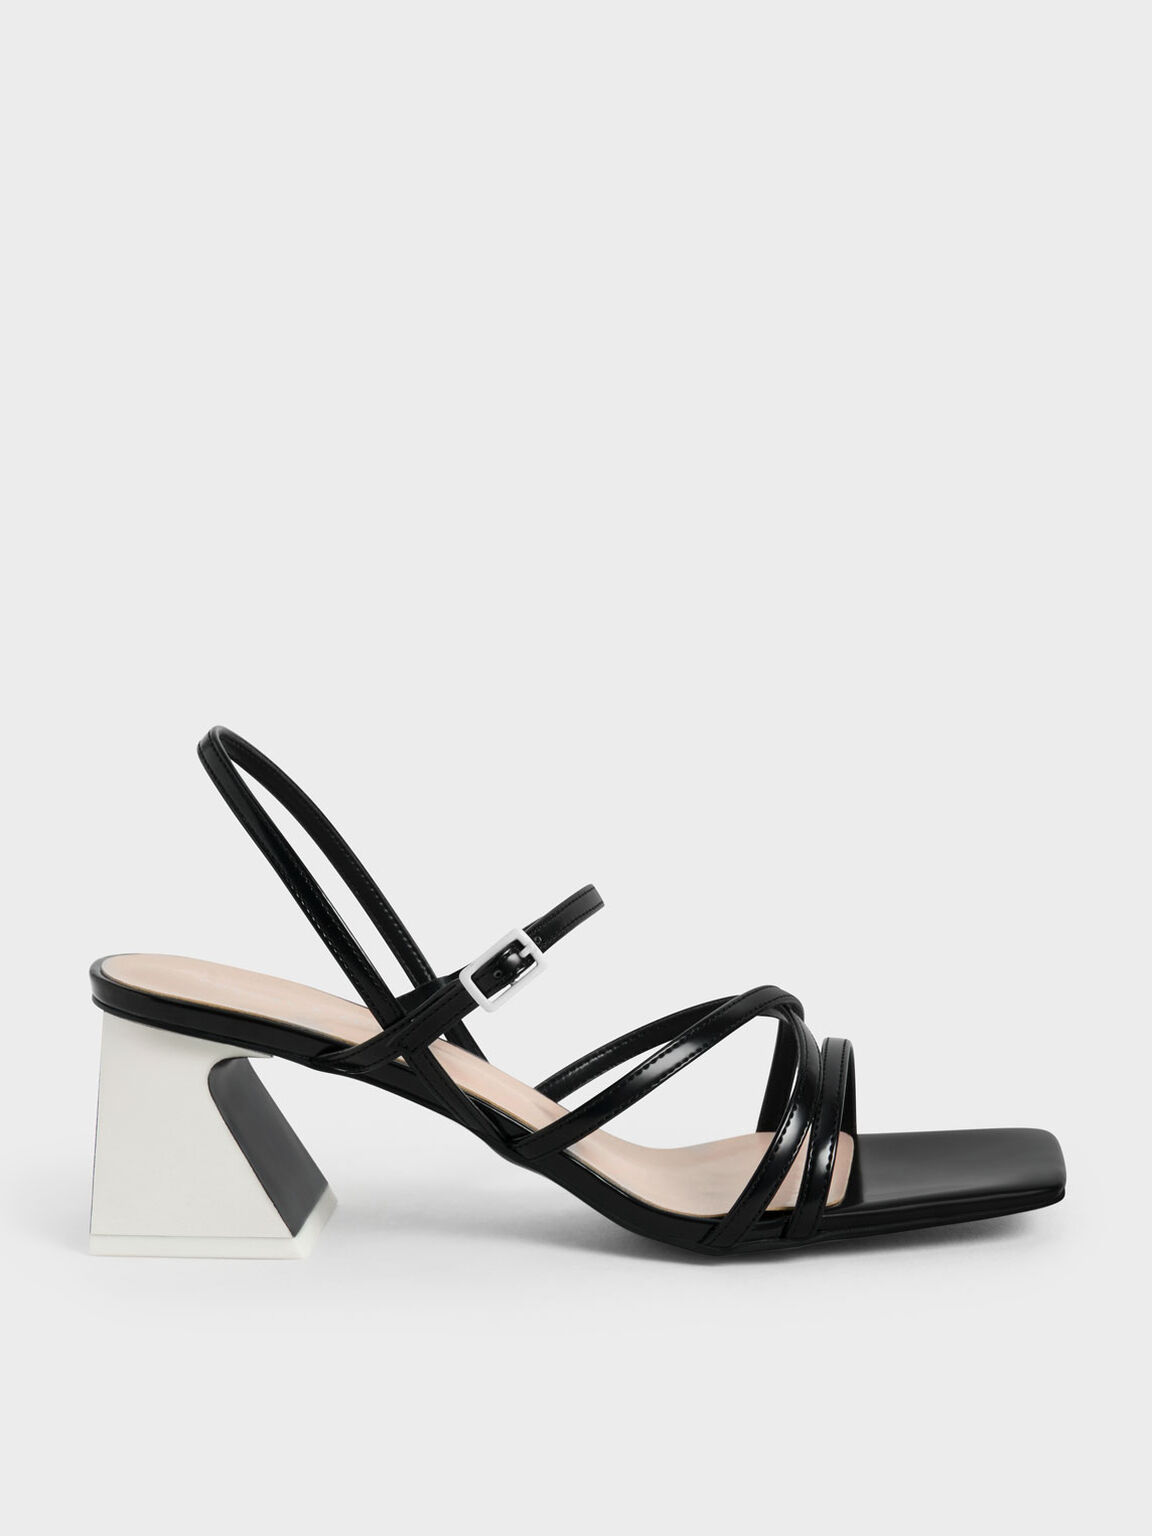 Women's Heels | Shop Exclusive Styles | CHARLES & KEITH SA